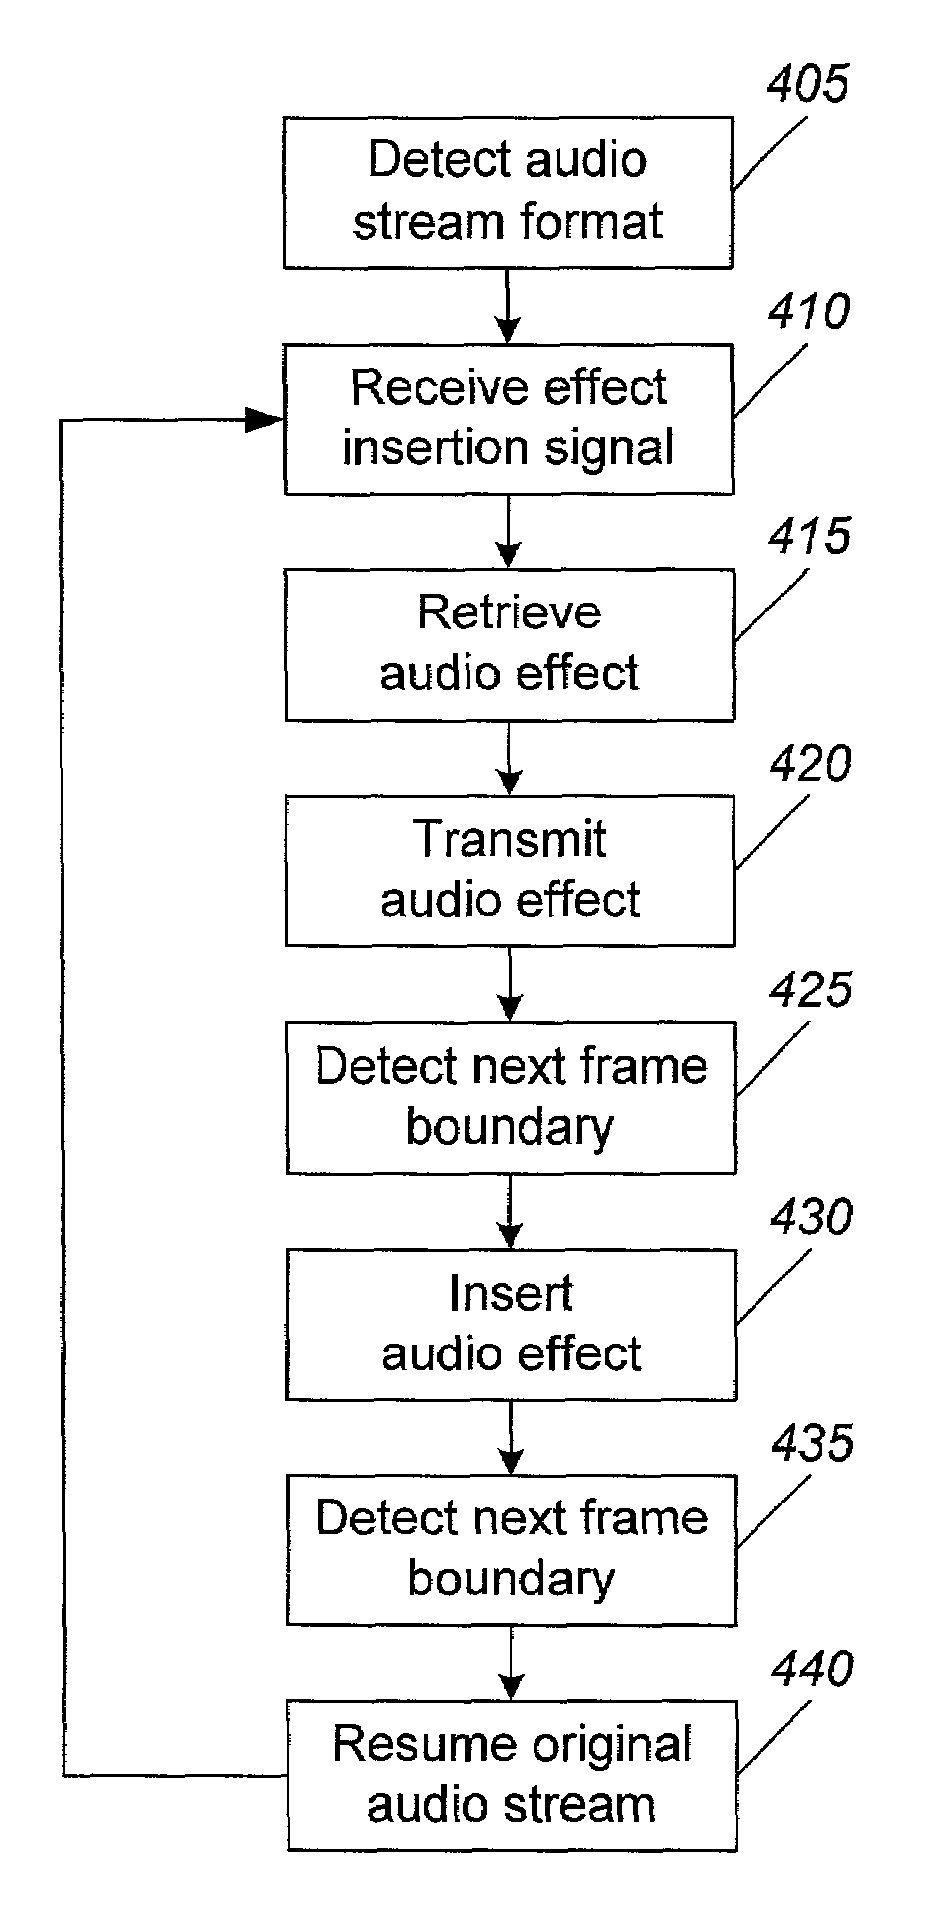 Apparatus and method for inserting data effects into a digital data stream